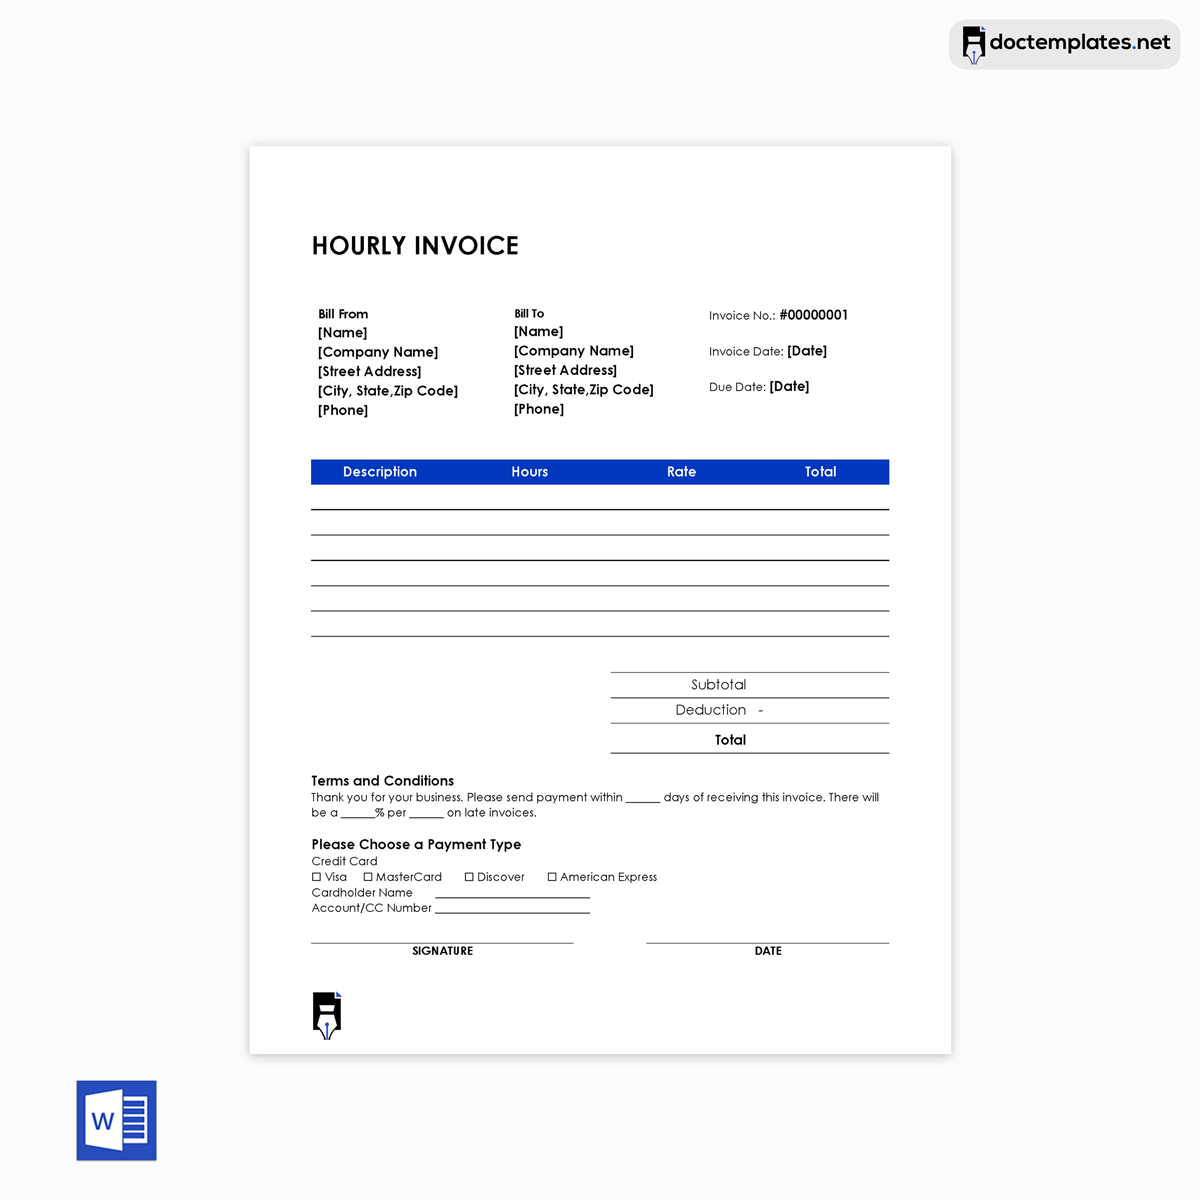  hourly invoice template word -07